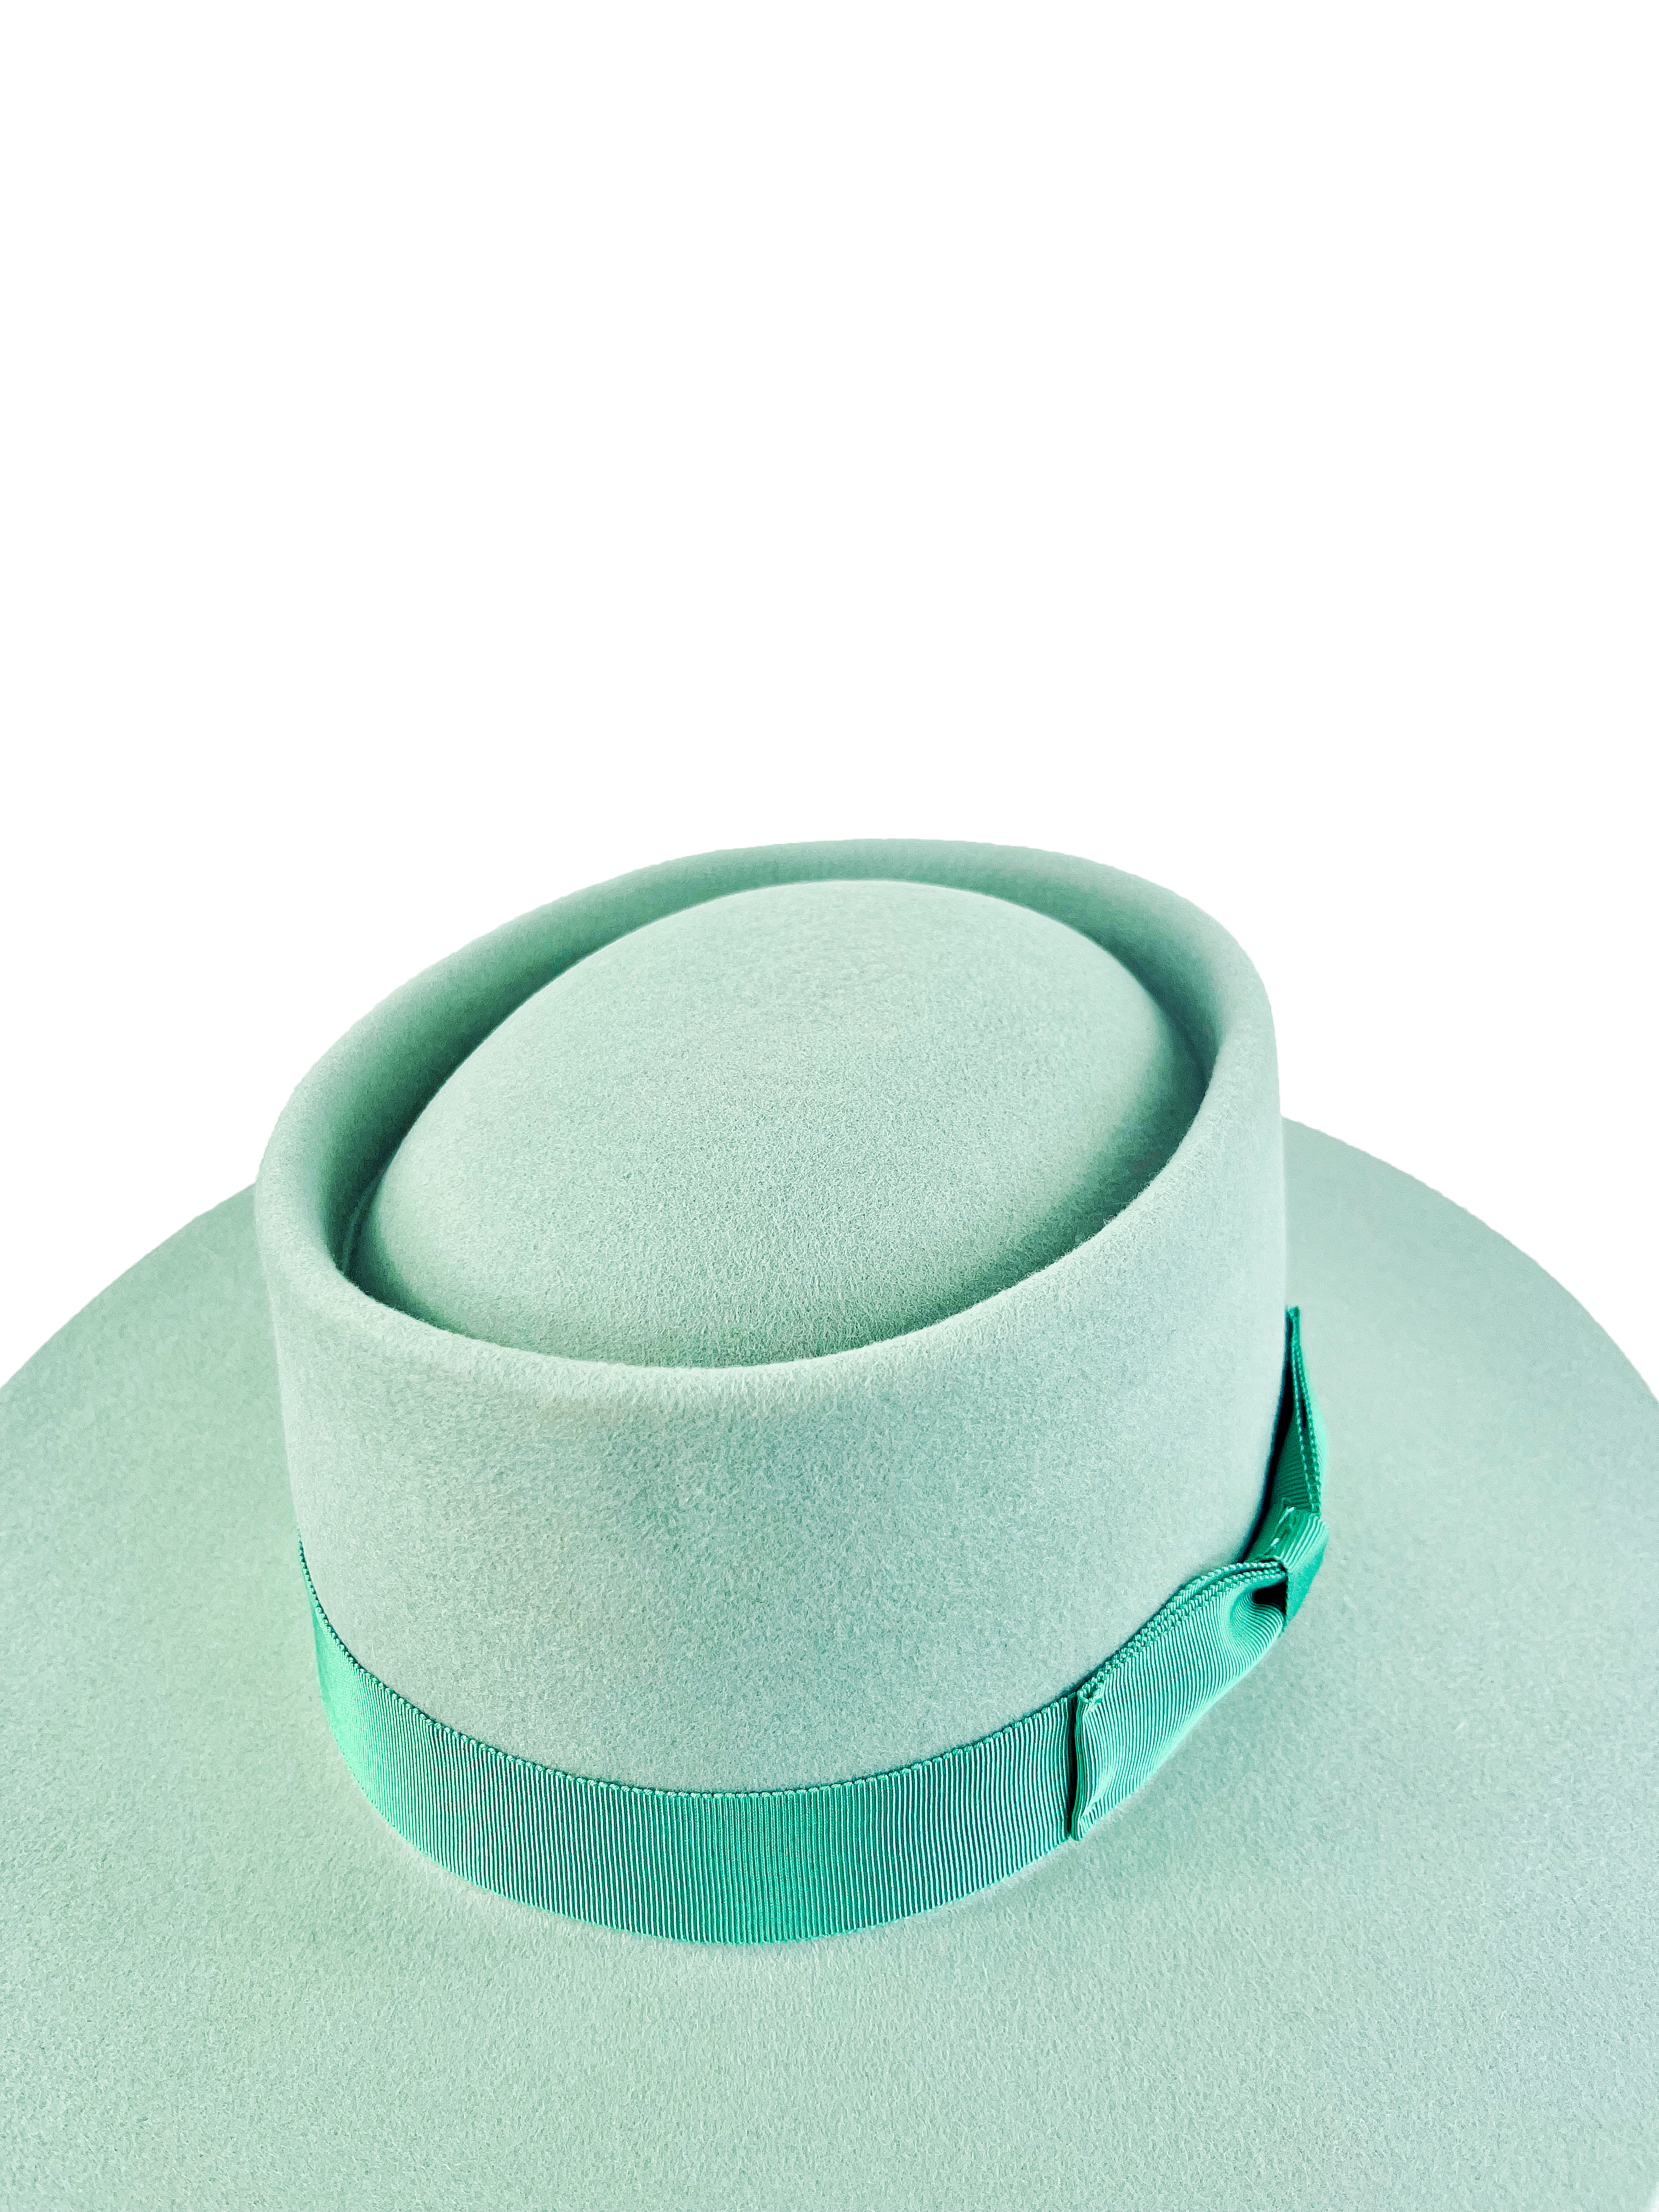 woman's fashion kayo boater hat in mint green